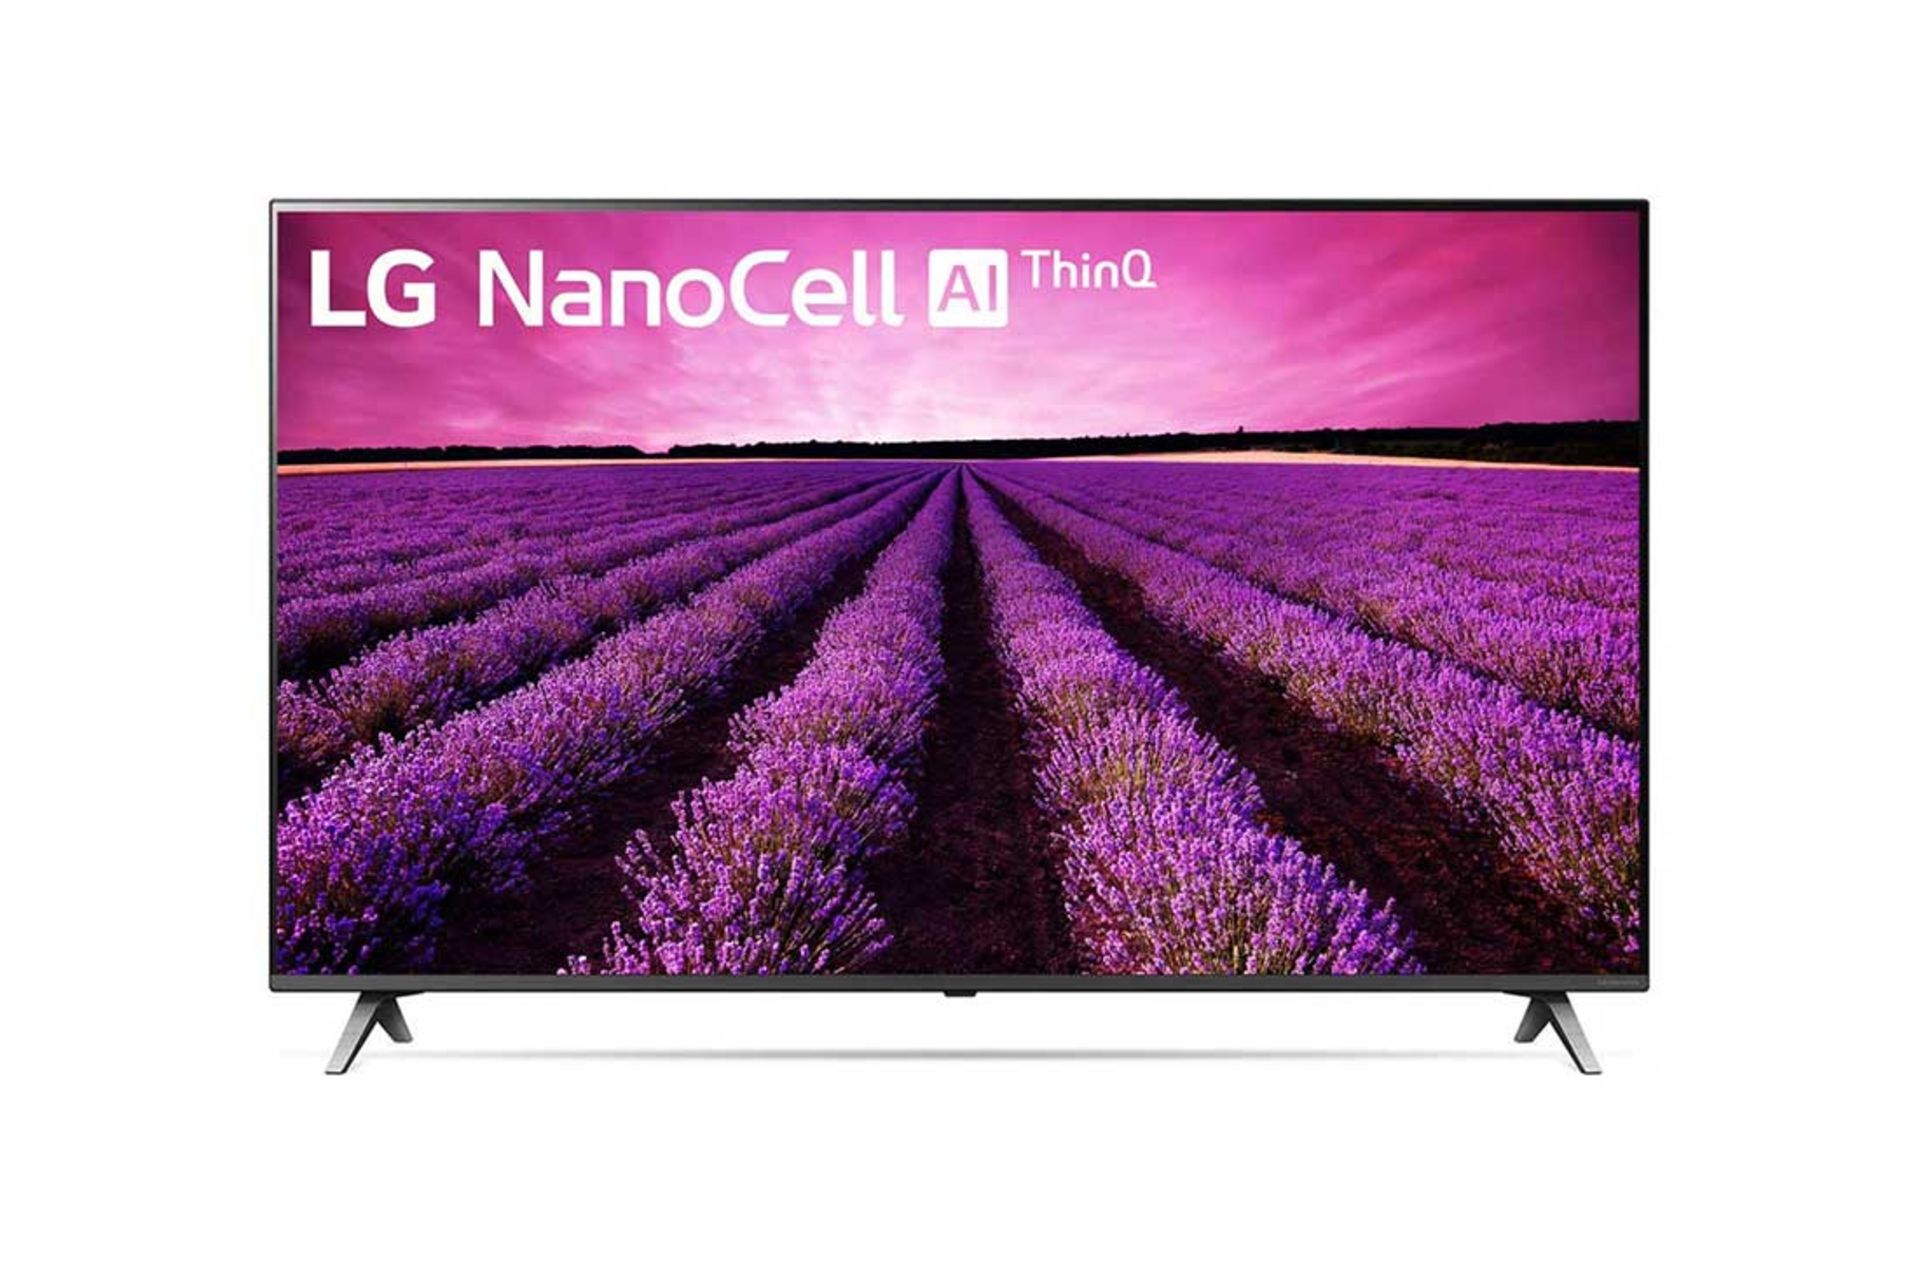 V Grade A LG 49 Inch ACTIVE HDR 4K SUPER ULTRA HD NANO LED SMART TV WITH FREEVIEW HD & WEBOS &